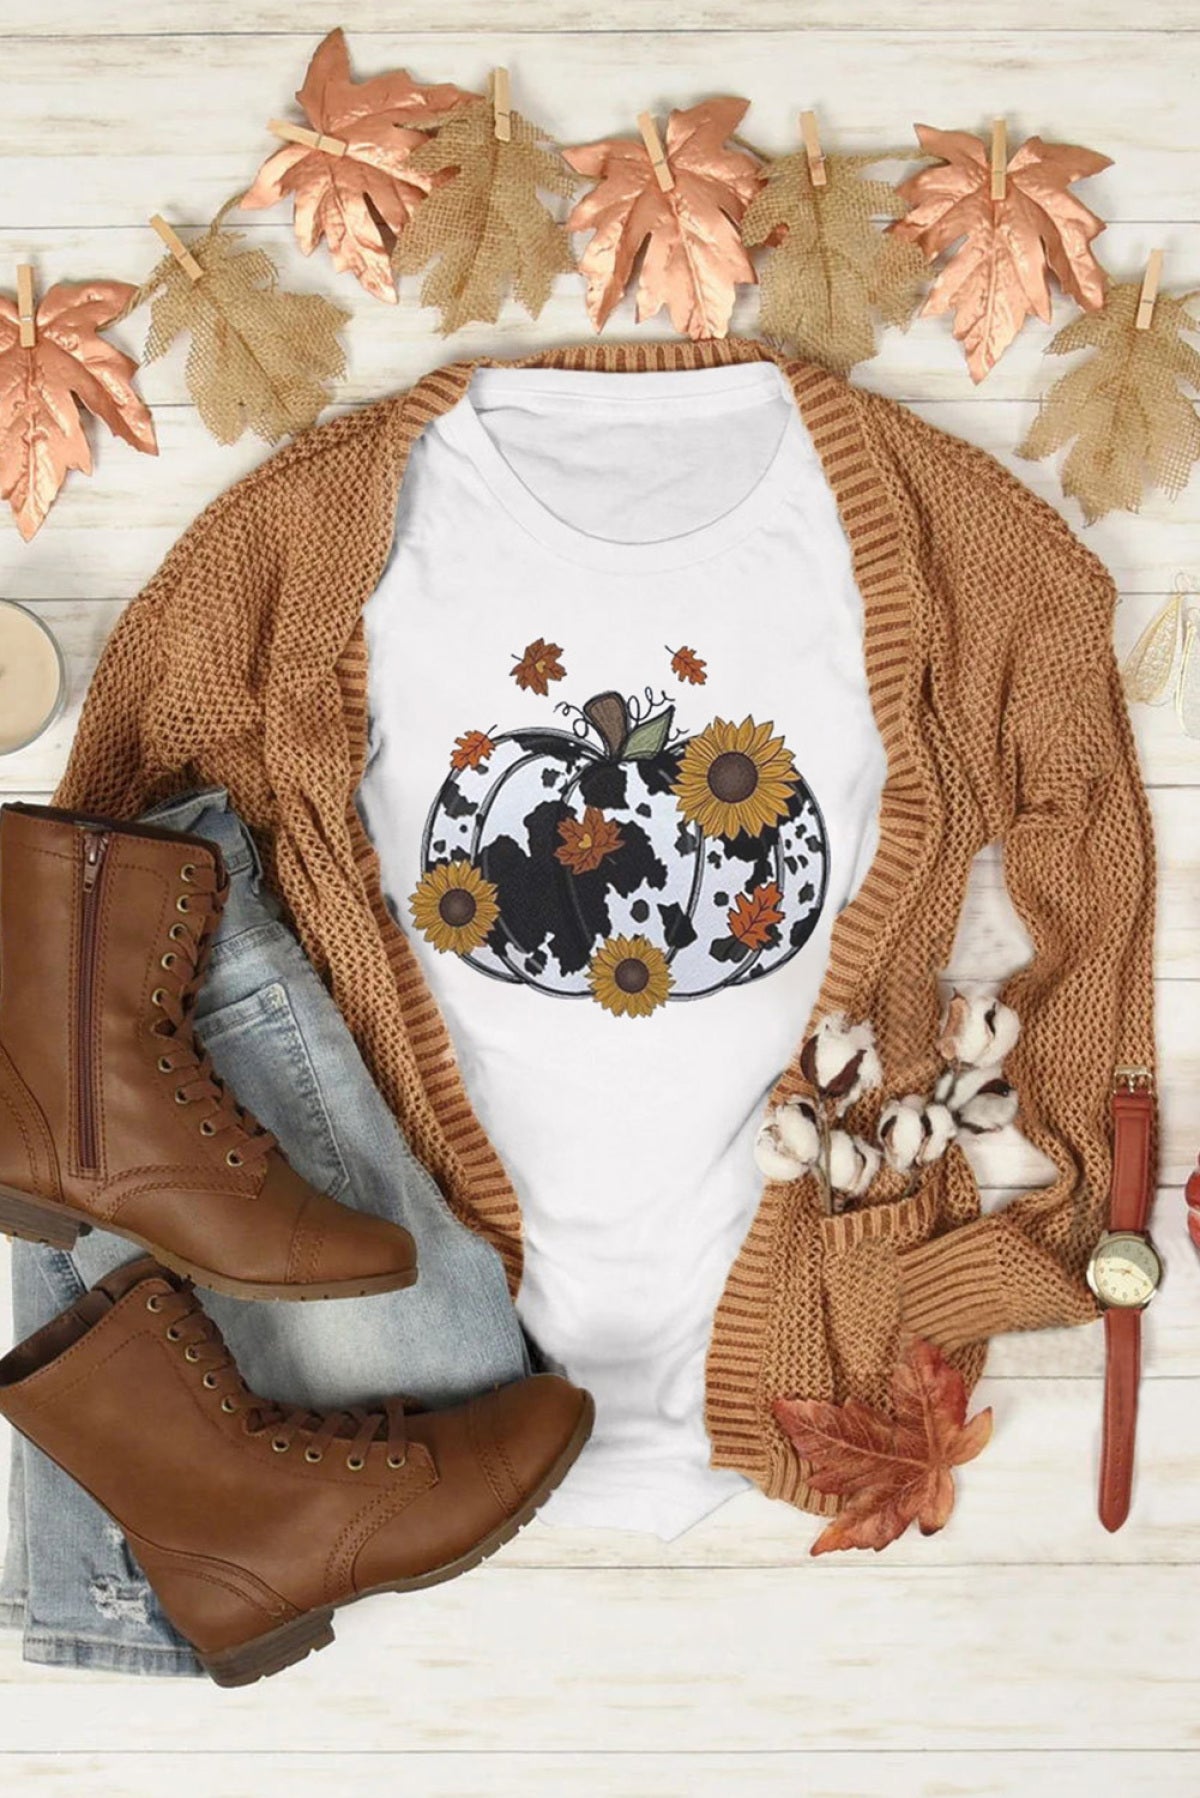 White Cow Pattern Maple Leaf Sunflower T-Shirts